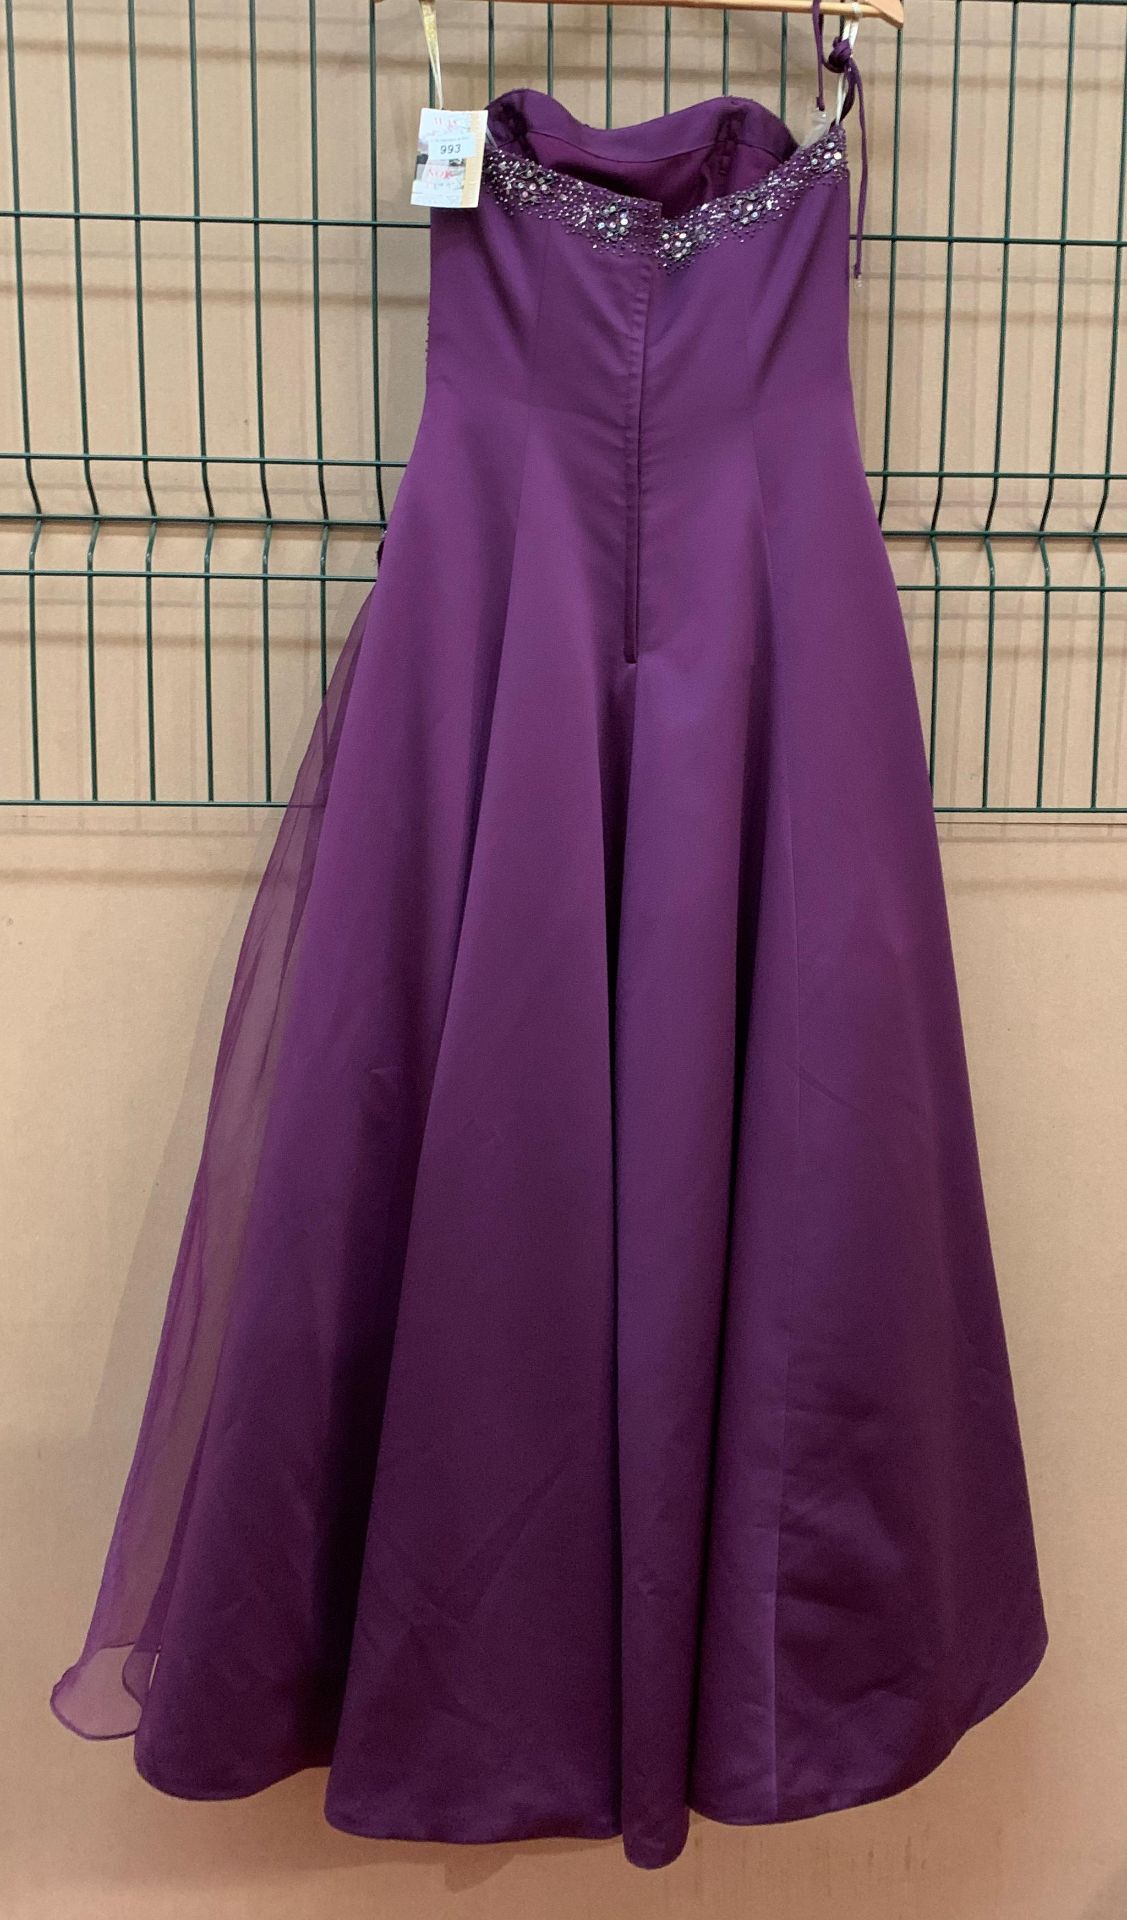 A bridesmaid/prom dress by Forever Yours, Chloe, passion, size 8, - Image 2 of 2